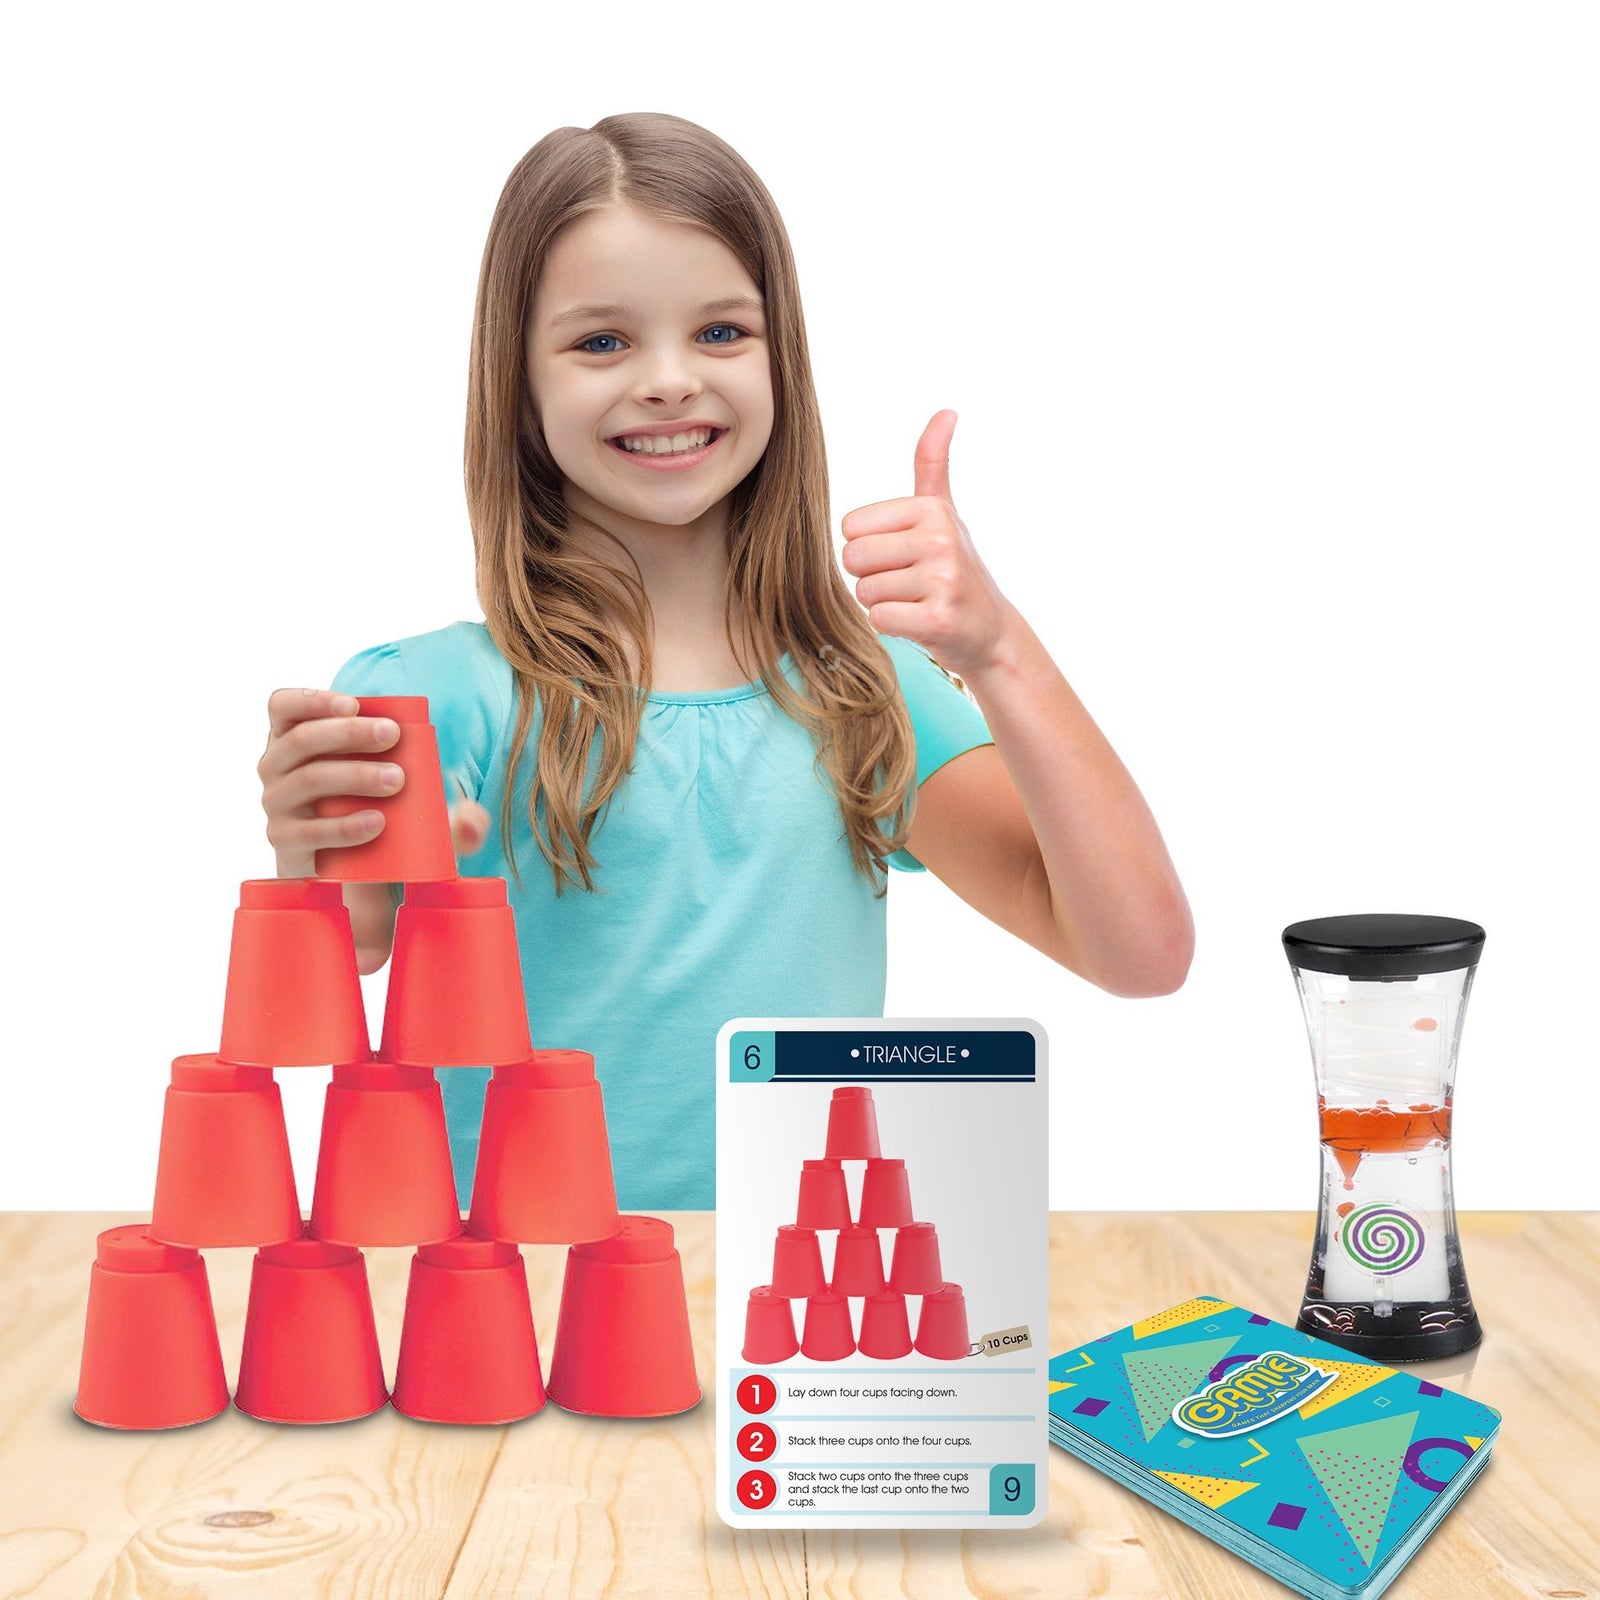 Gamie Stacking Cups Game with 18 Fun Challenges and Water Timer, 24 Stacking Cups, Sturdy Plastic, Classic Family Game, Great Gift Idea for Boys and Girls, Tons of Fun